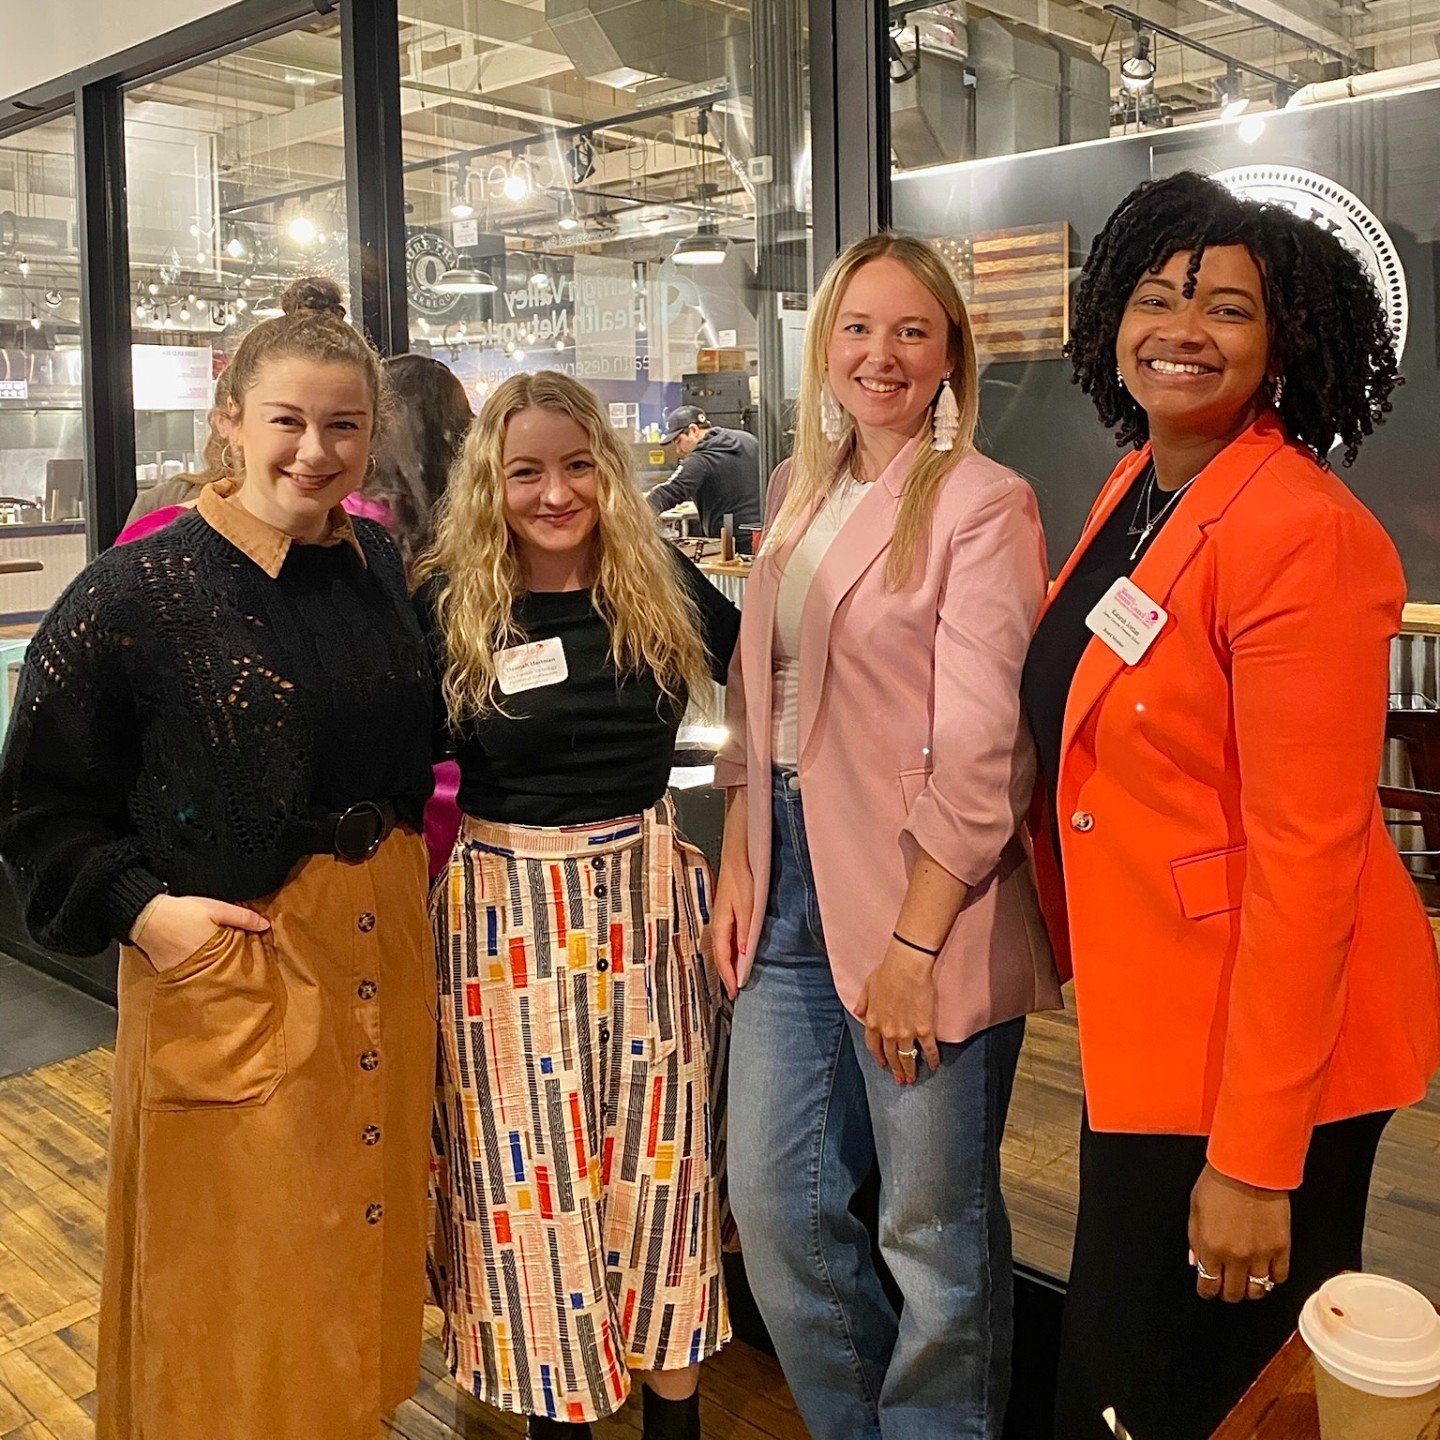 Connections made ✔️ 

#SocialT team members, Rachel and Amiee, joined the @wbclehighvalley at @eastonpublicmkt last week for a casual networking event which focused on connecting with fellow women business leaders and celebrating National Volunteer M